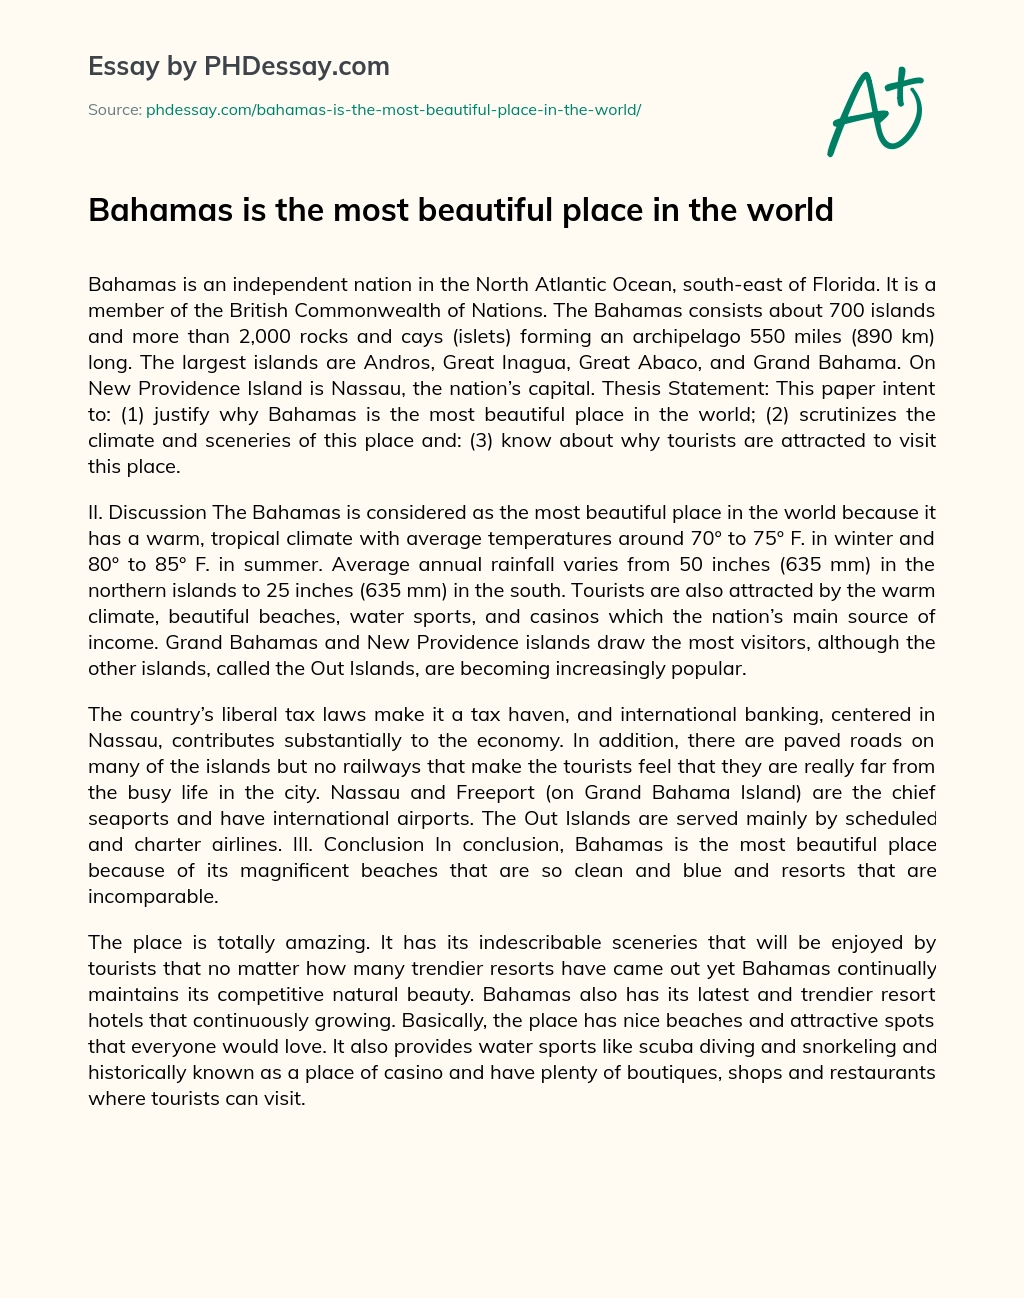 Bahamas is the most beautiful place in the world essay